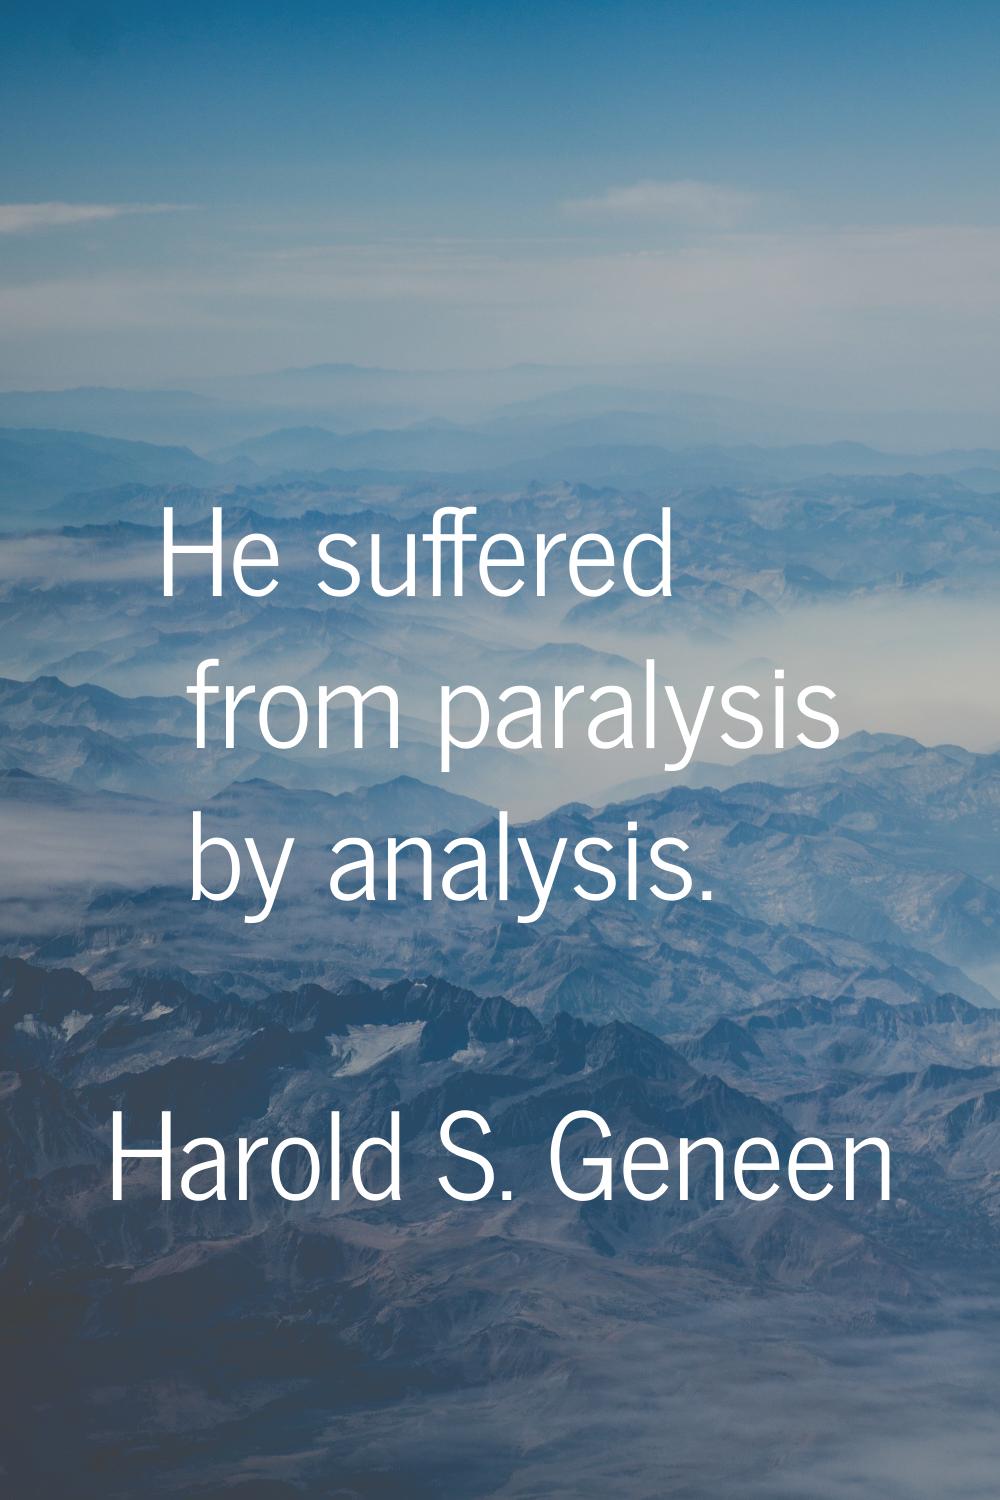 He suffered from paralysis by analysis.